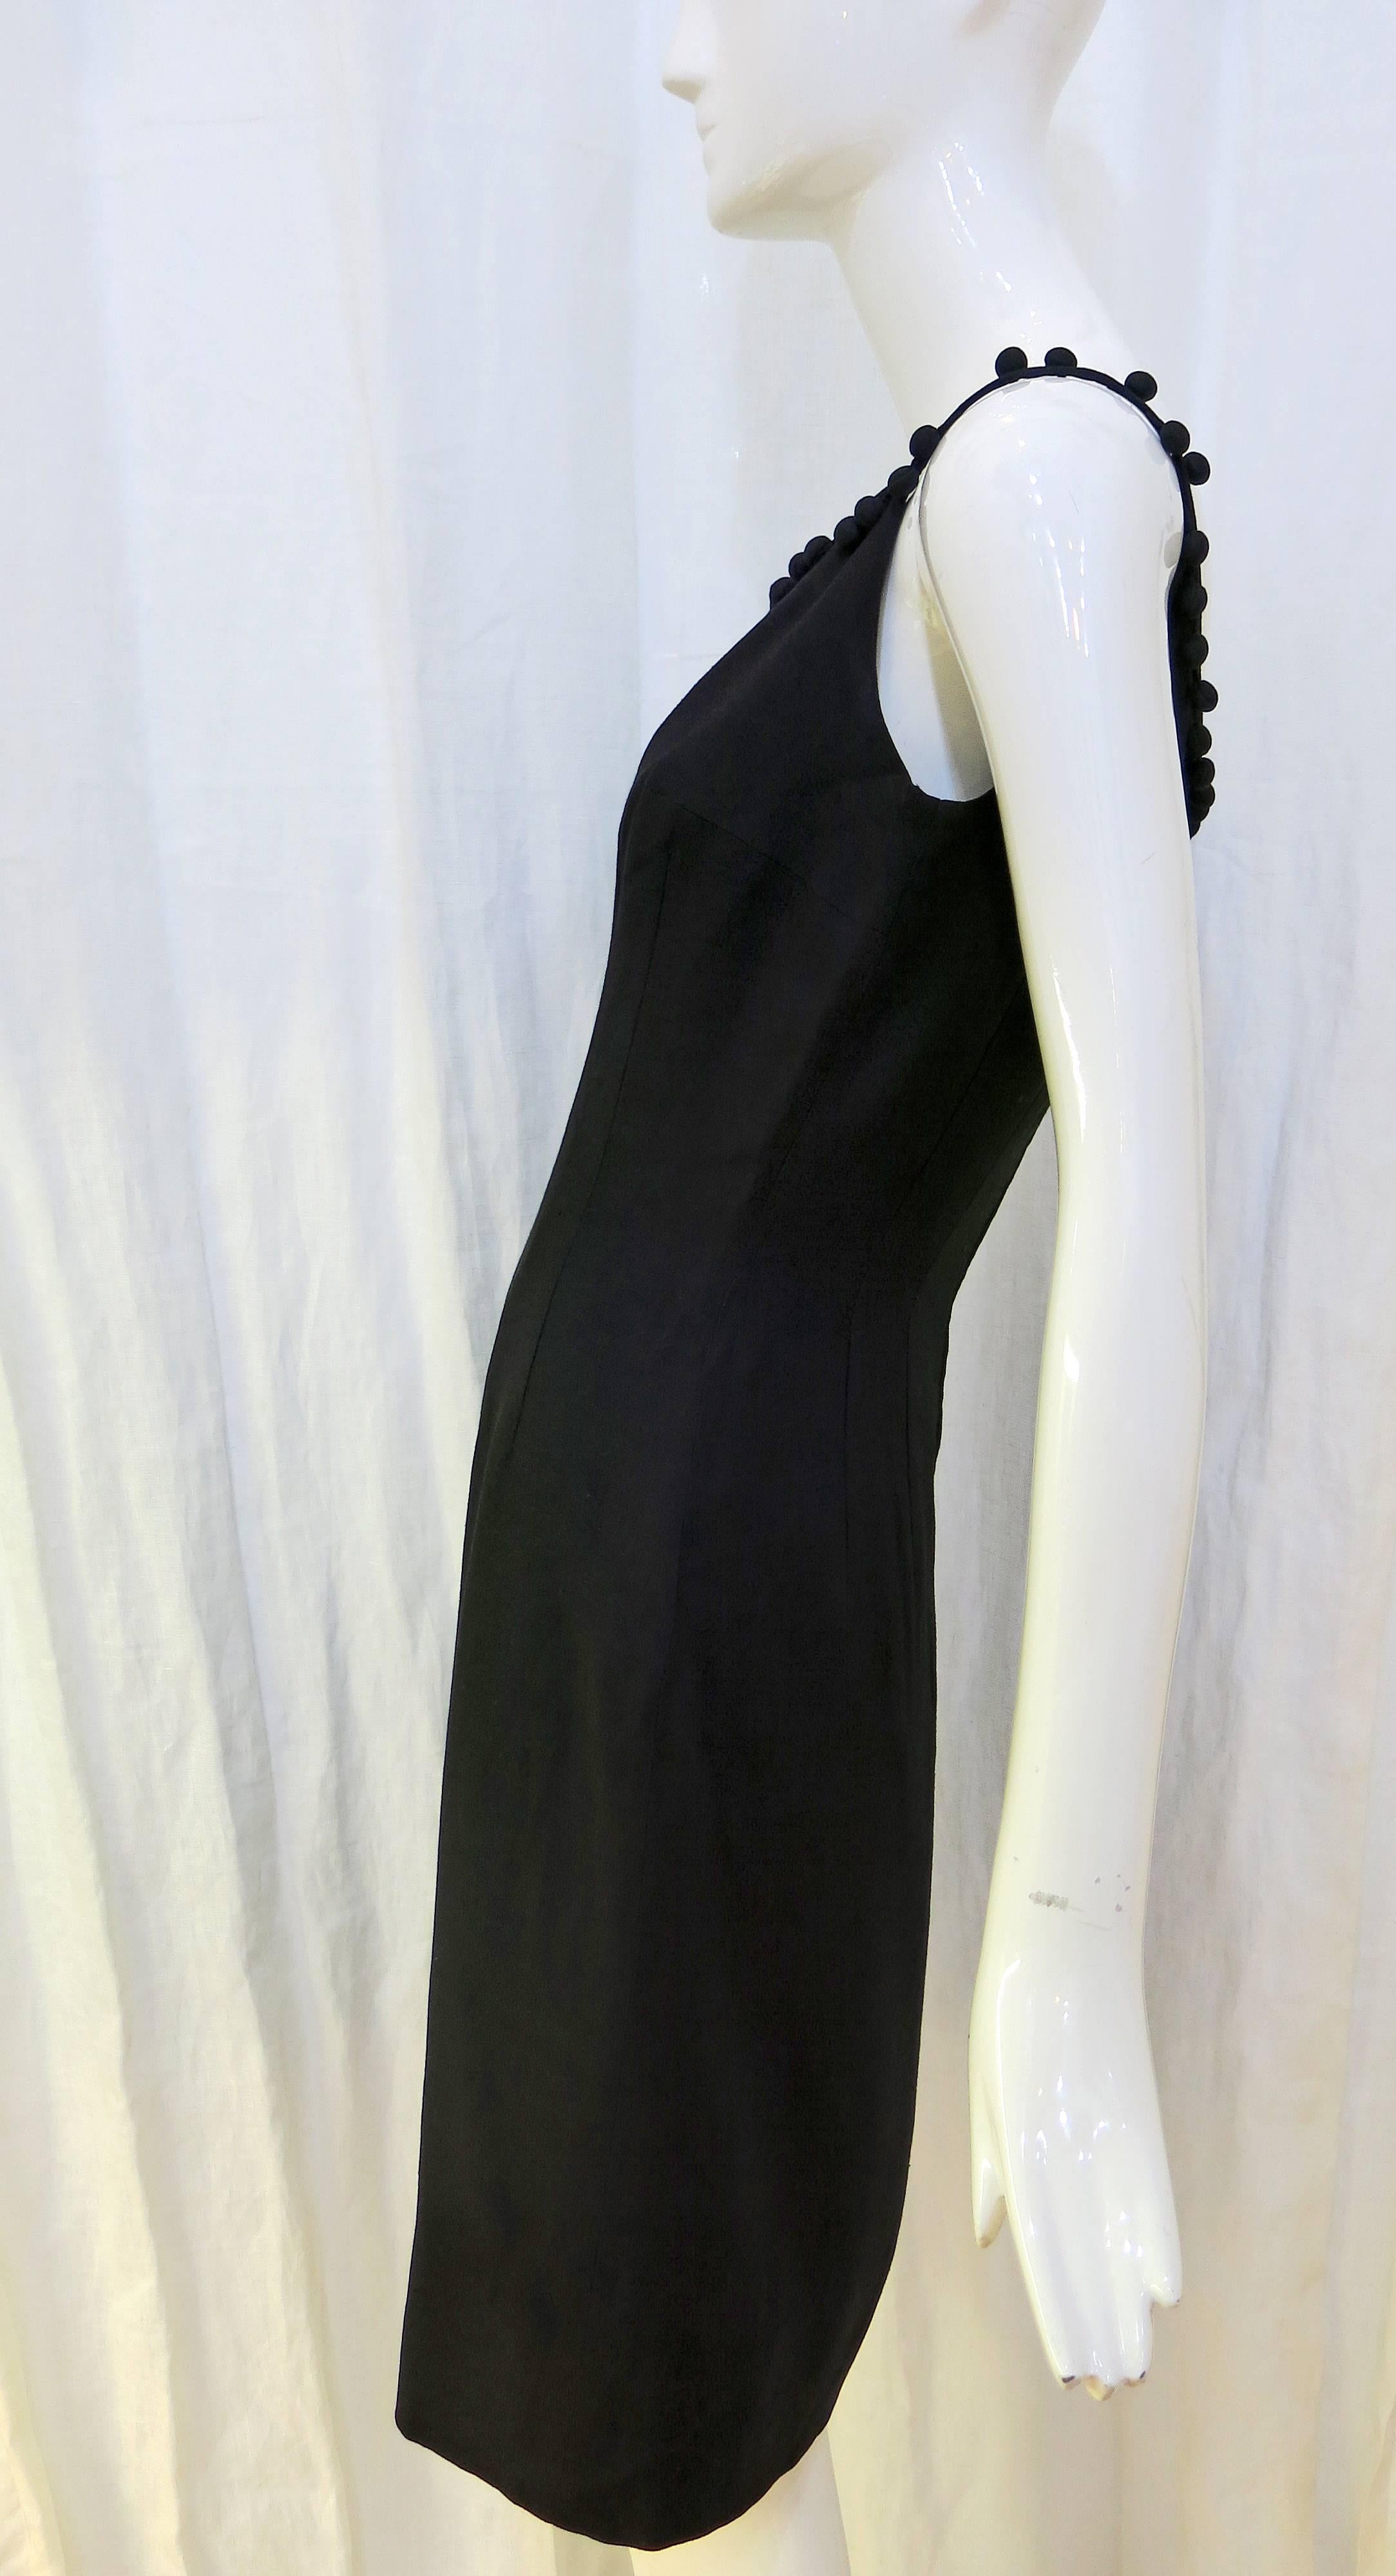 Black simple and classy cocktail dress with pom pom detailing at neckline. Sleeveless, sheath style, zips up the back. Could be worn with a blazer as a workplace ensemble or would make a beautiful summertime dinner dress for a date at a sidewalk